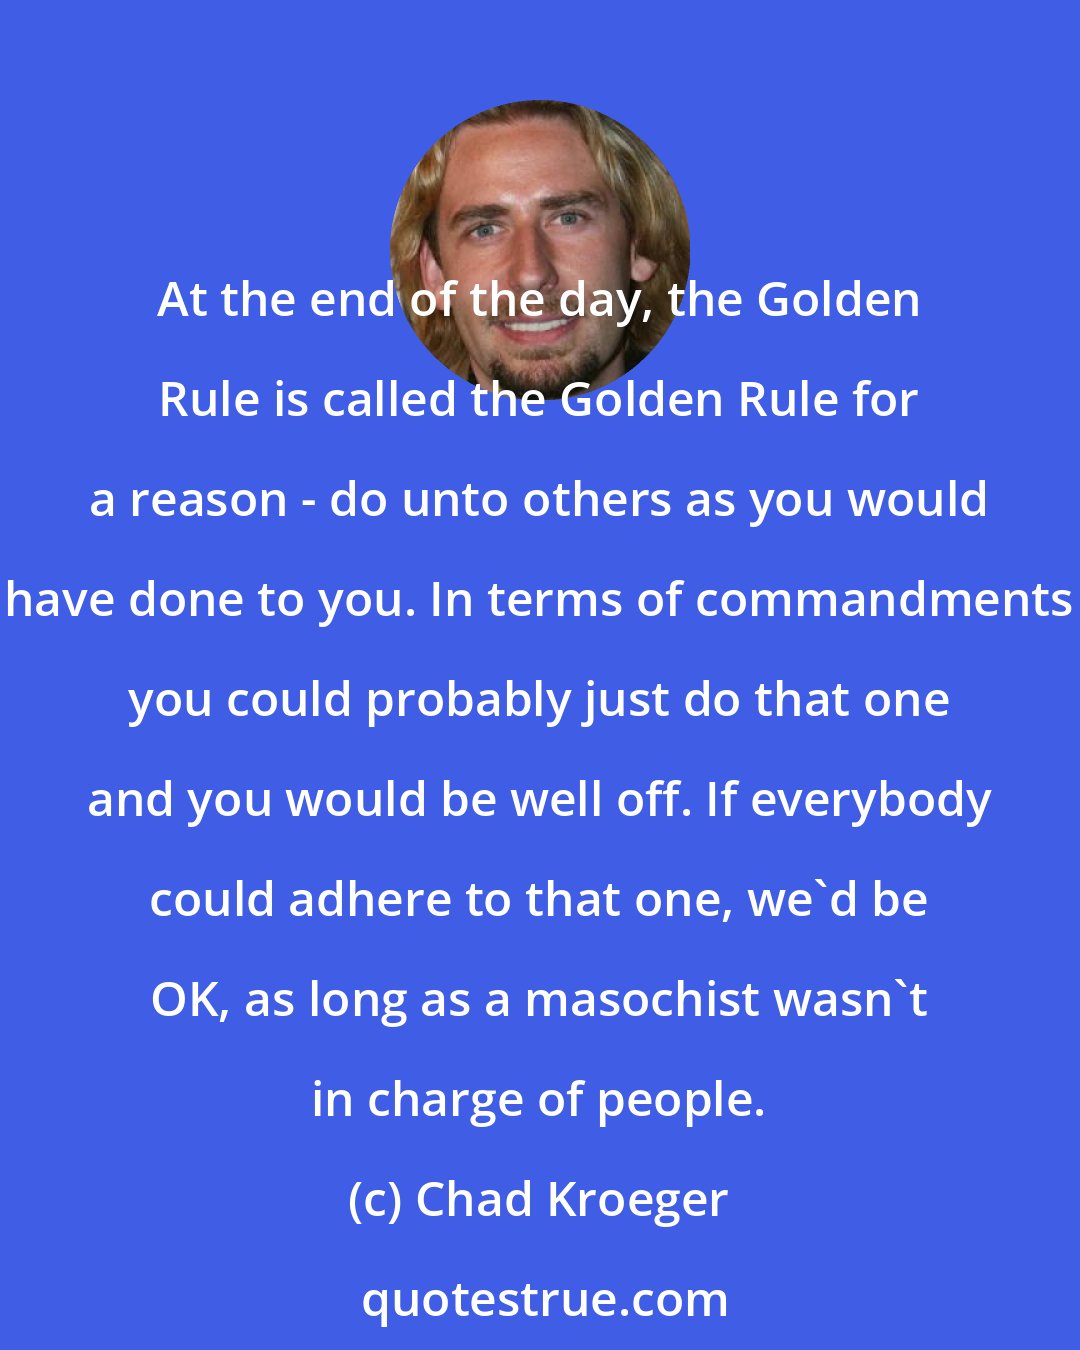 Chad Kroeger: At the end of the day, the Golden Rule is called the Golden Rule for a reason - do unto others as you would have done to you. In terms of commandments you could probably just do that one and you would be well off. If everybody could adhere to that one, we'd be OK, as long as a masochist wasn't in charge of people.